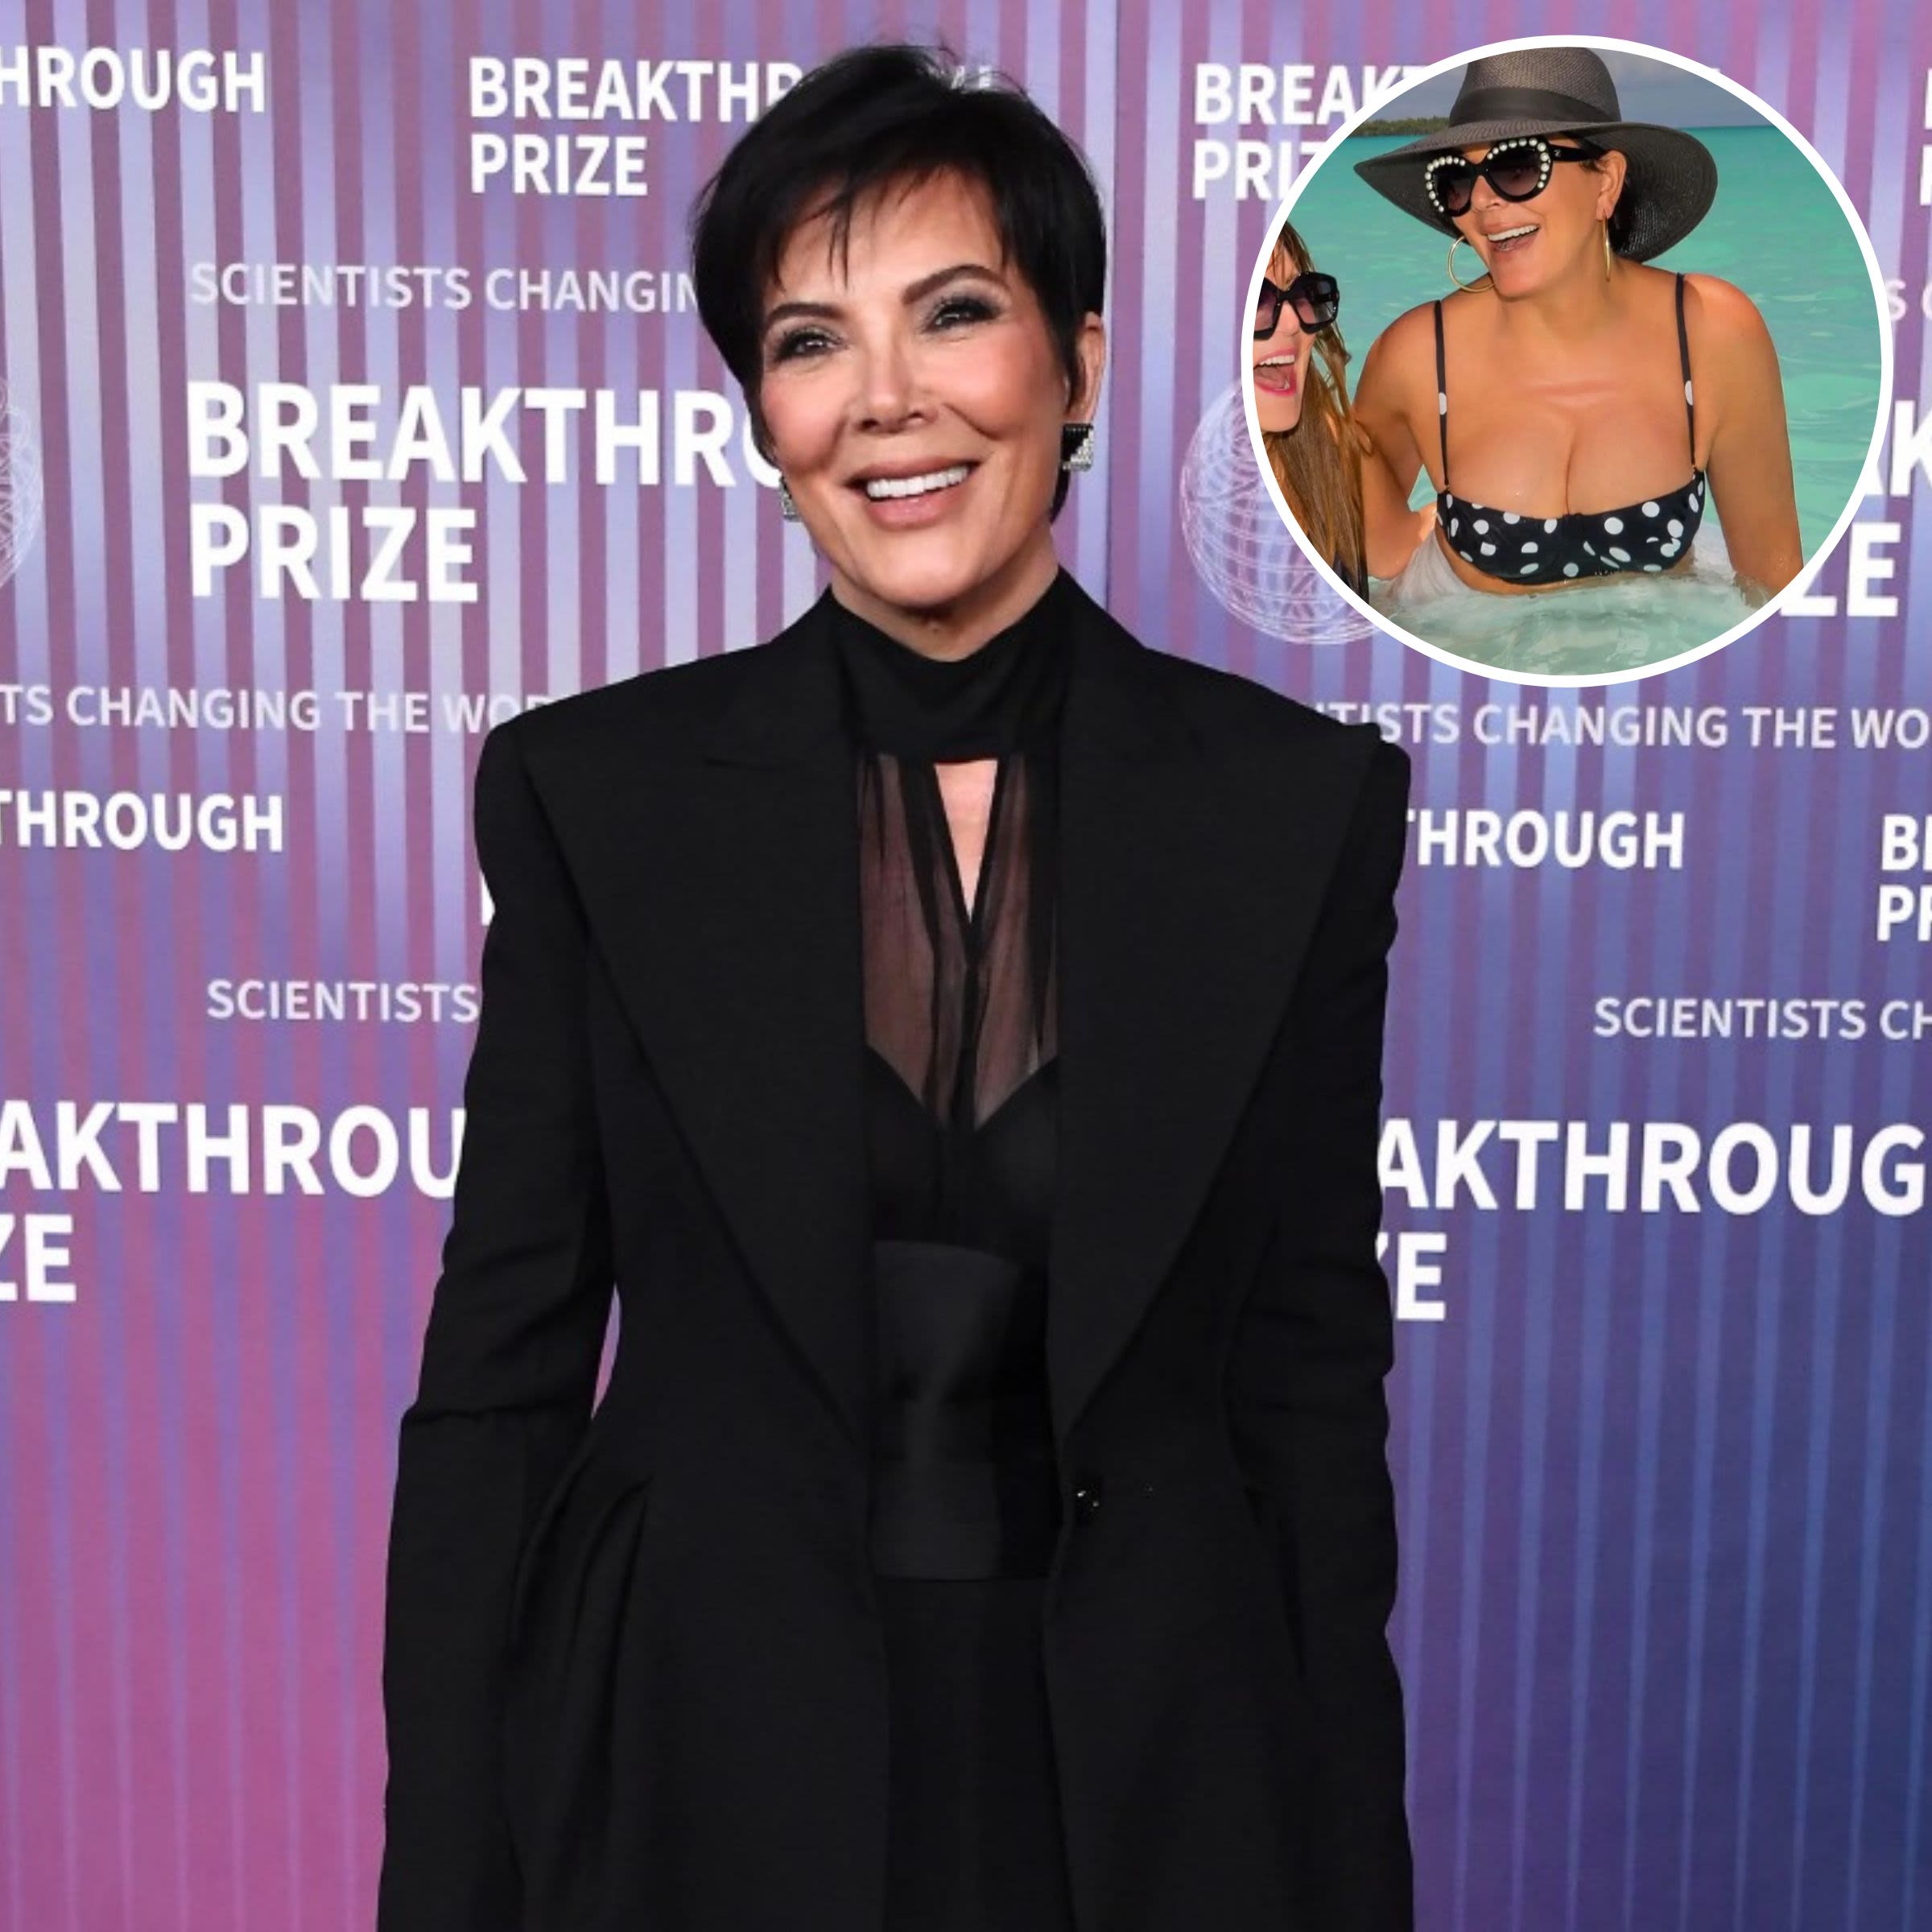 Kris Jenner Shares Rare Bikini Photo After Weight Loss as Fans Question Editing